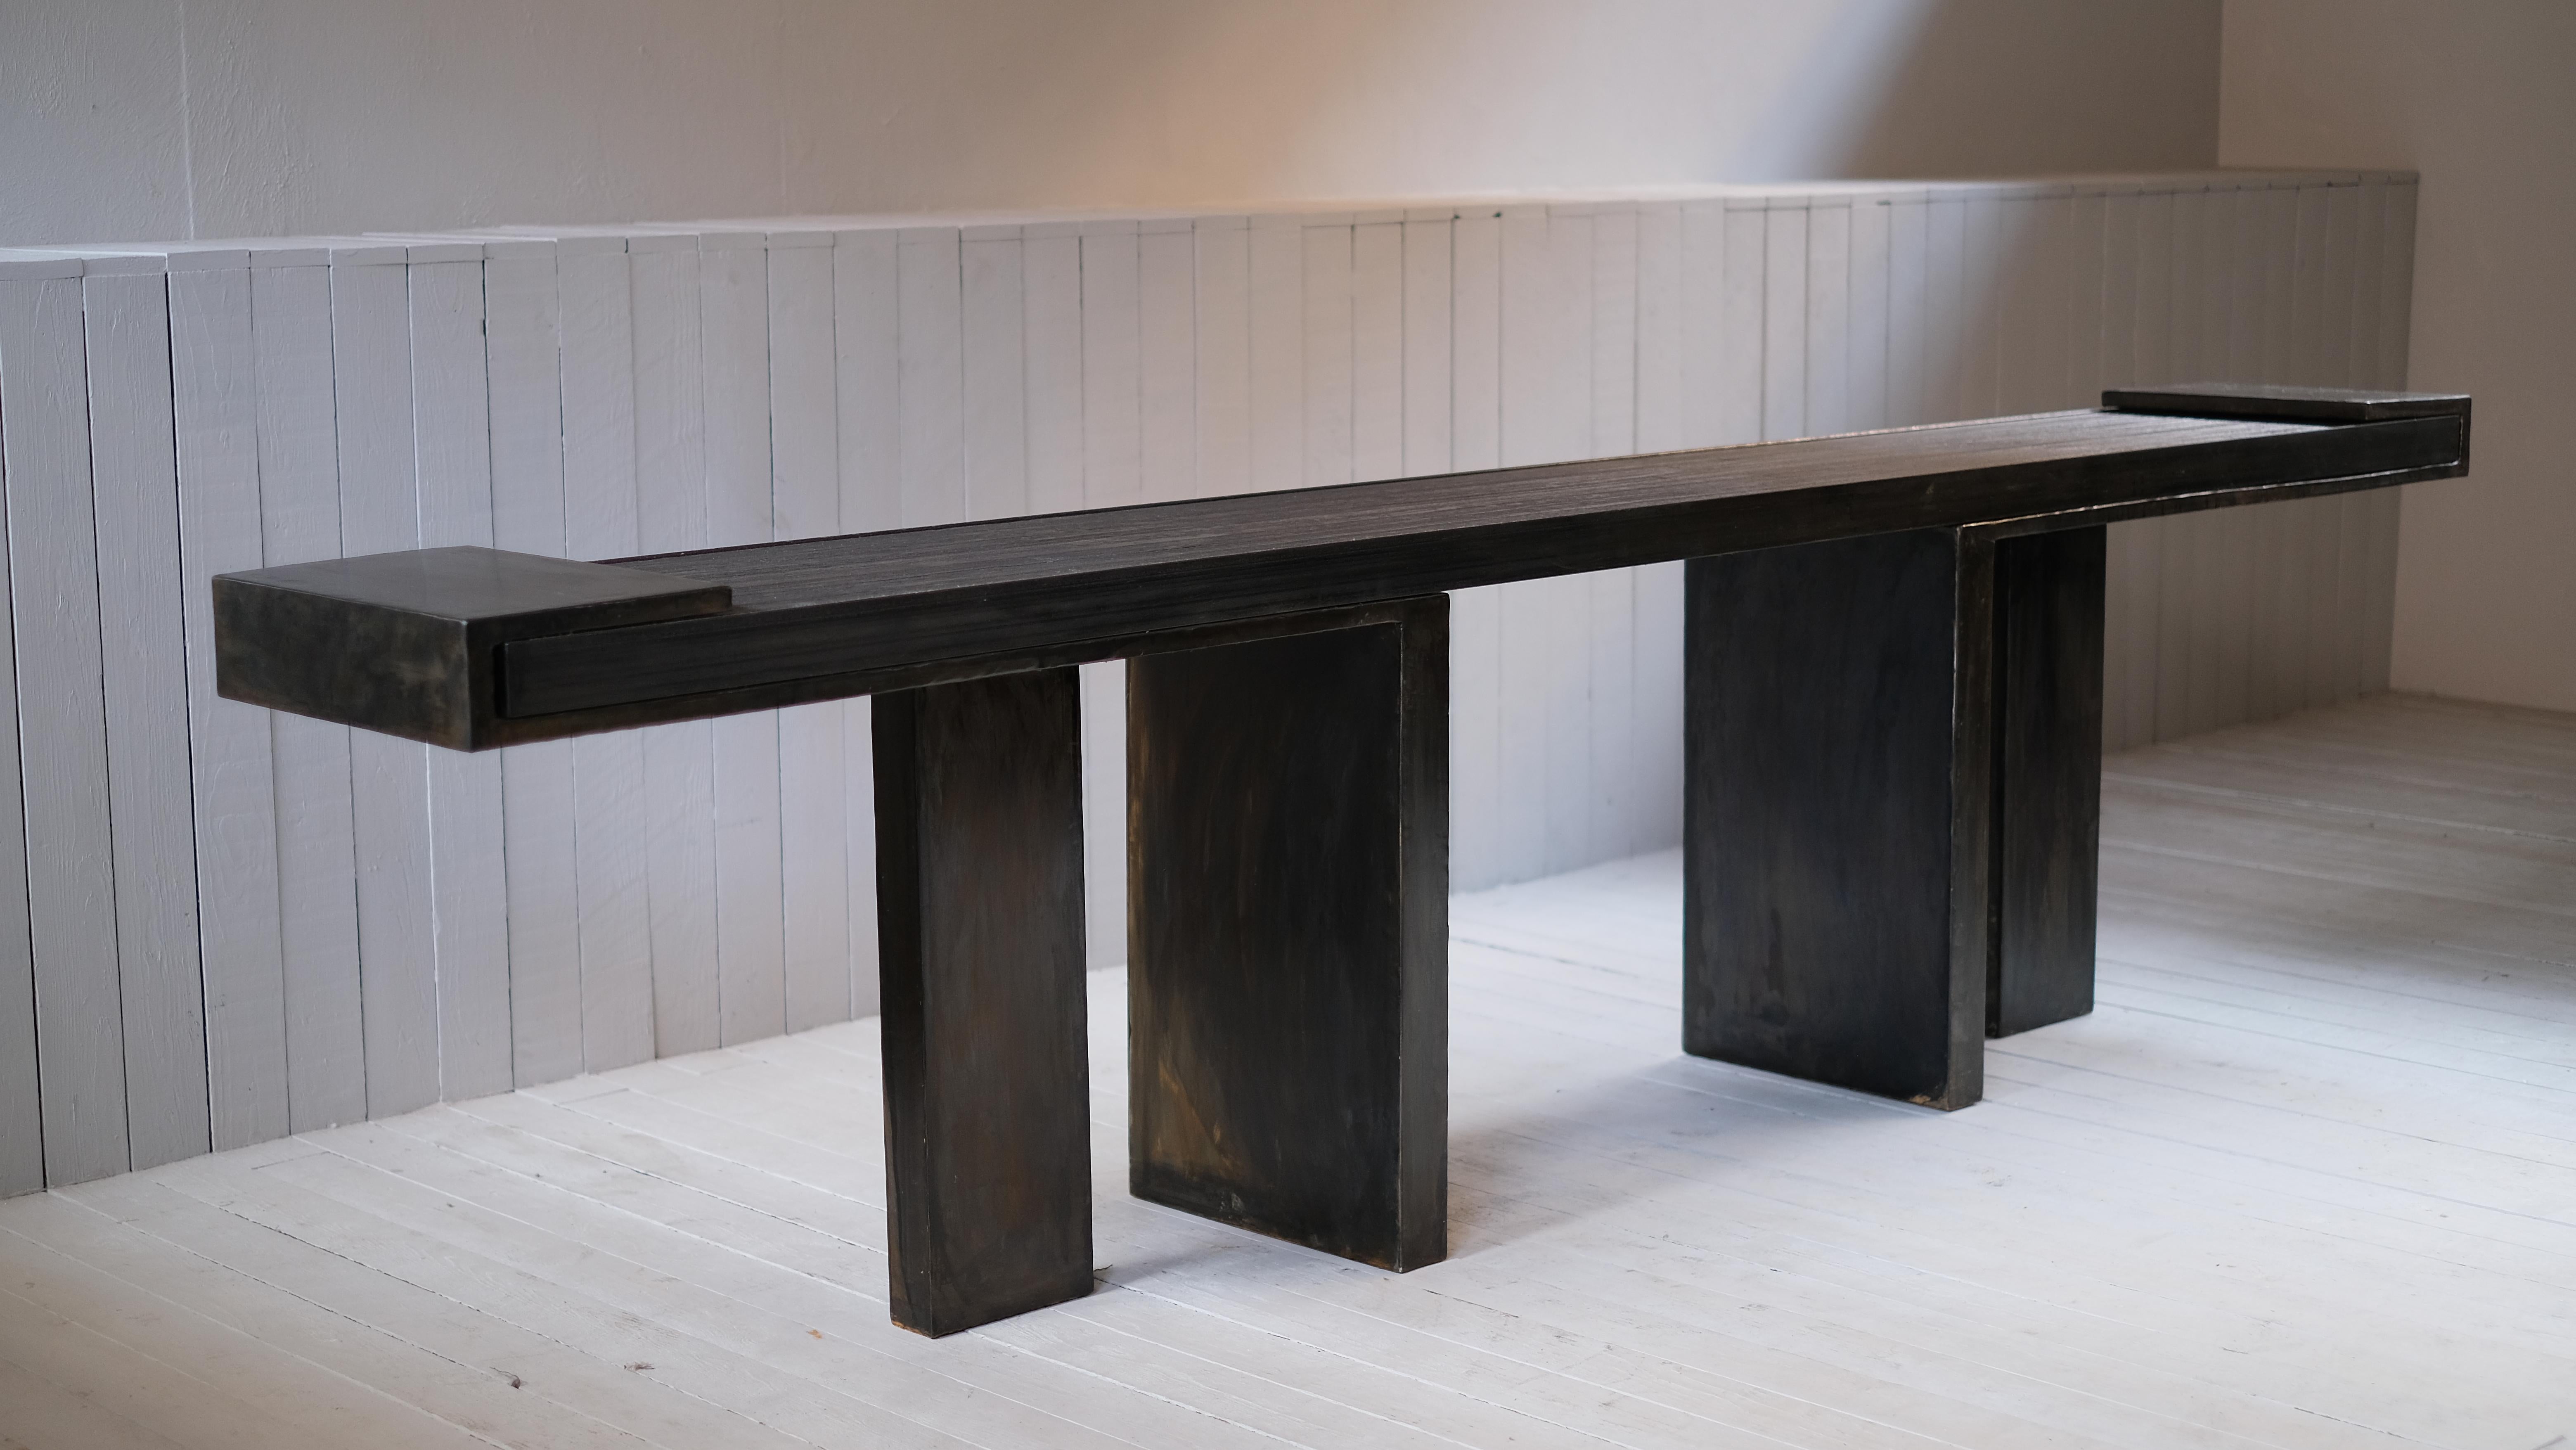 Console by Arno Declercq
Limited edition of 8.
Dimensions: D300 x W40 cm x H75 cm.
Materials: Japanese natural stone & patinated steel
Signed by Arno Declercq.

Arno Declercq
Belgian designer and art dealer who makes bespoke objects with